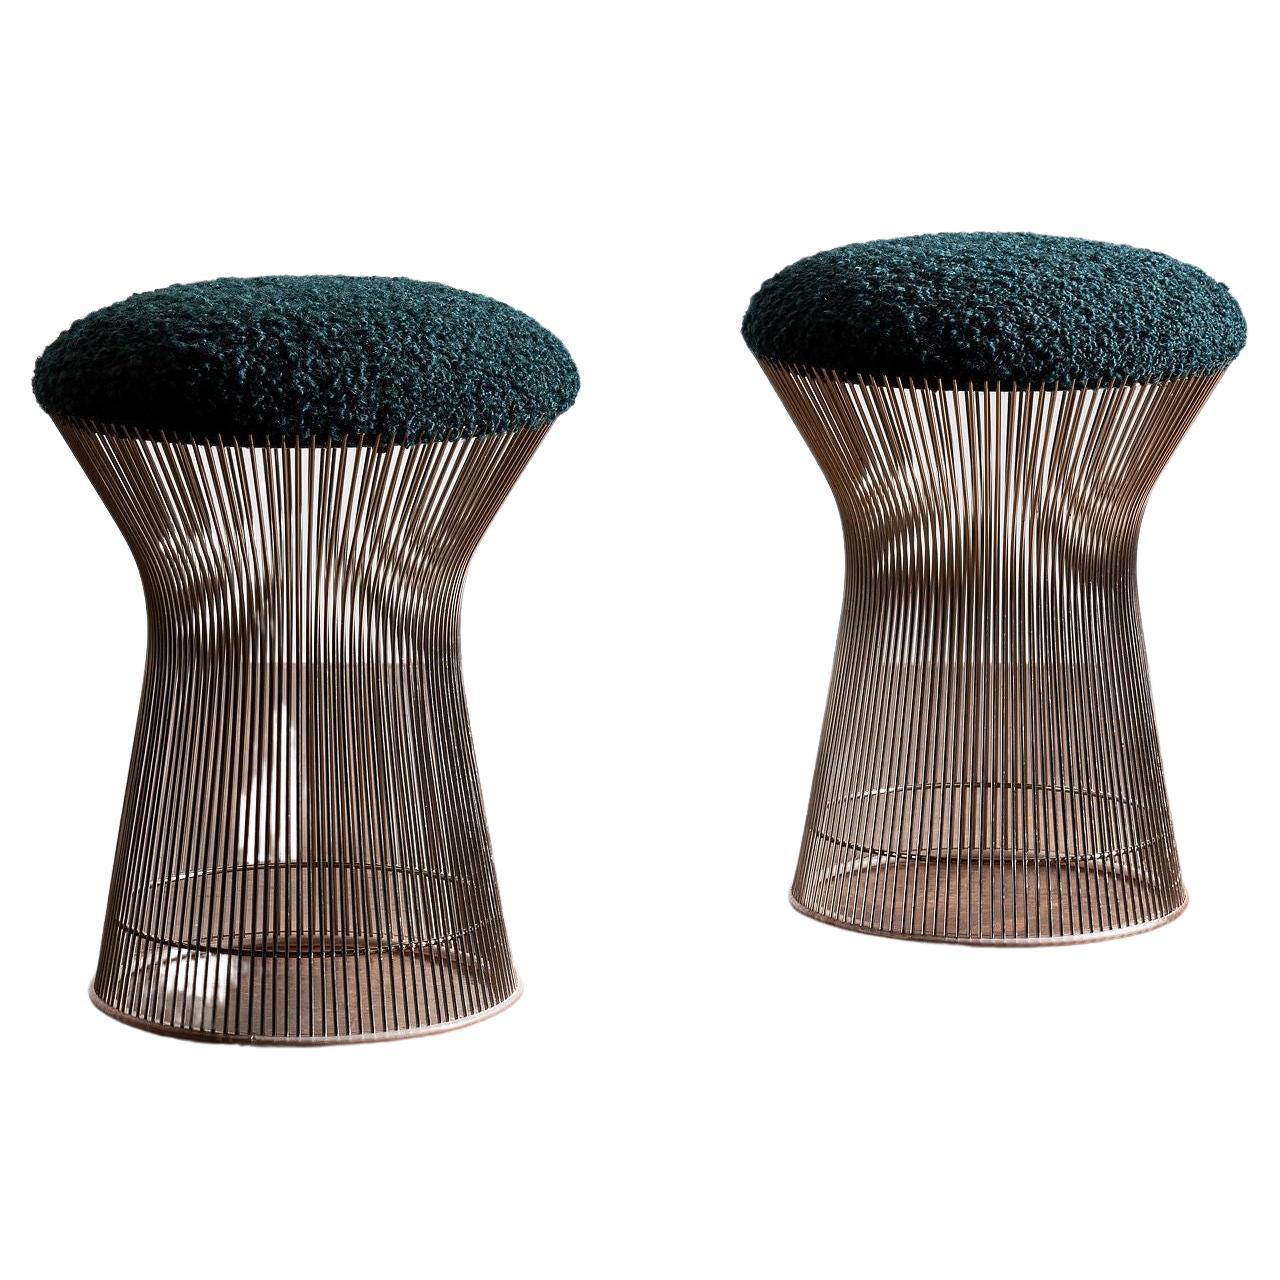 Pair of Warren Platner Wire Stools for Knoll, 1960s